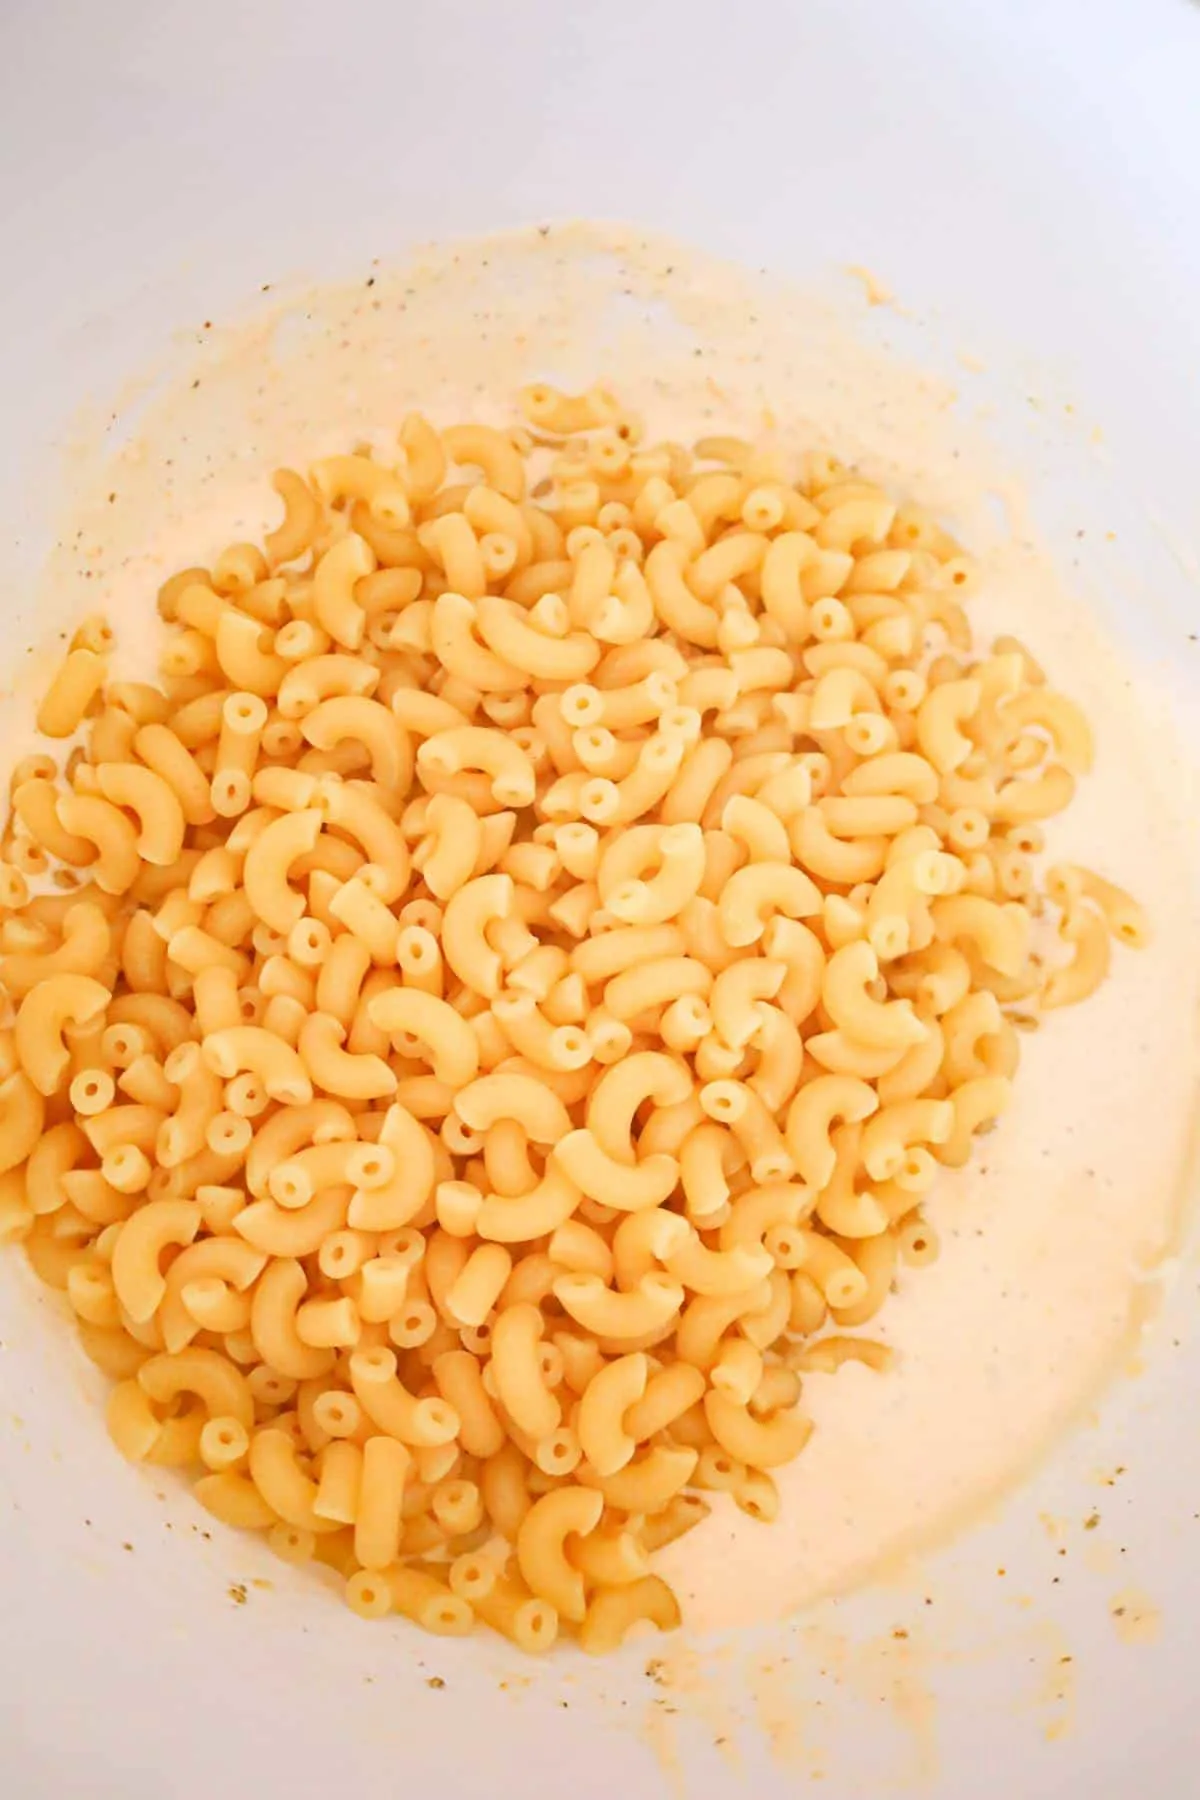 cooked macaroni noodles on top of cream and cheddar soup mixture in a mixing bowl